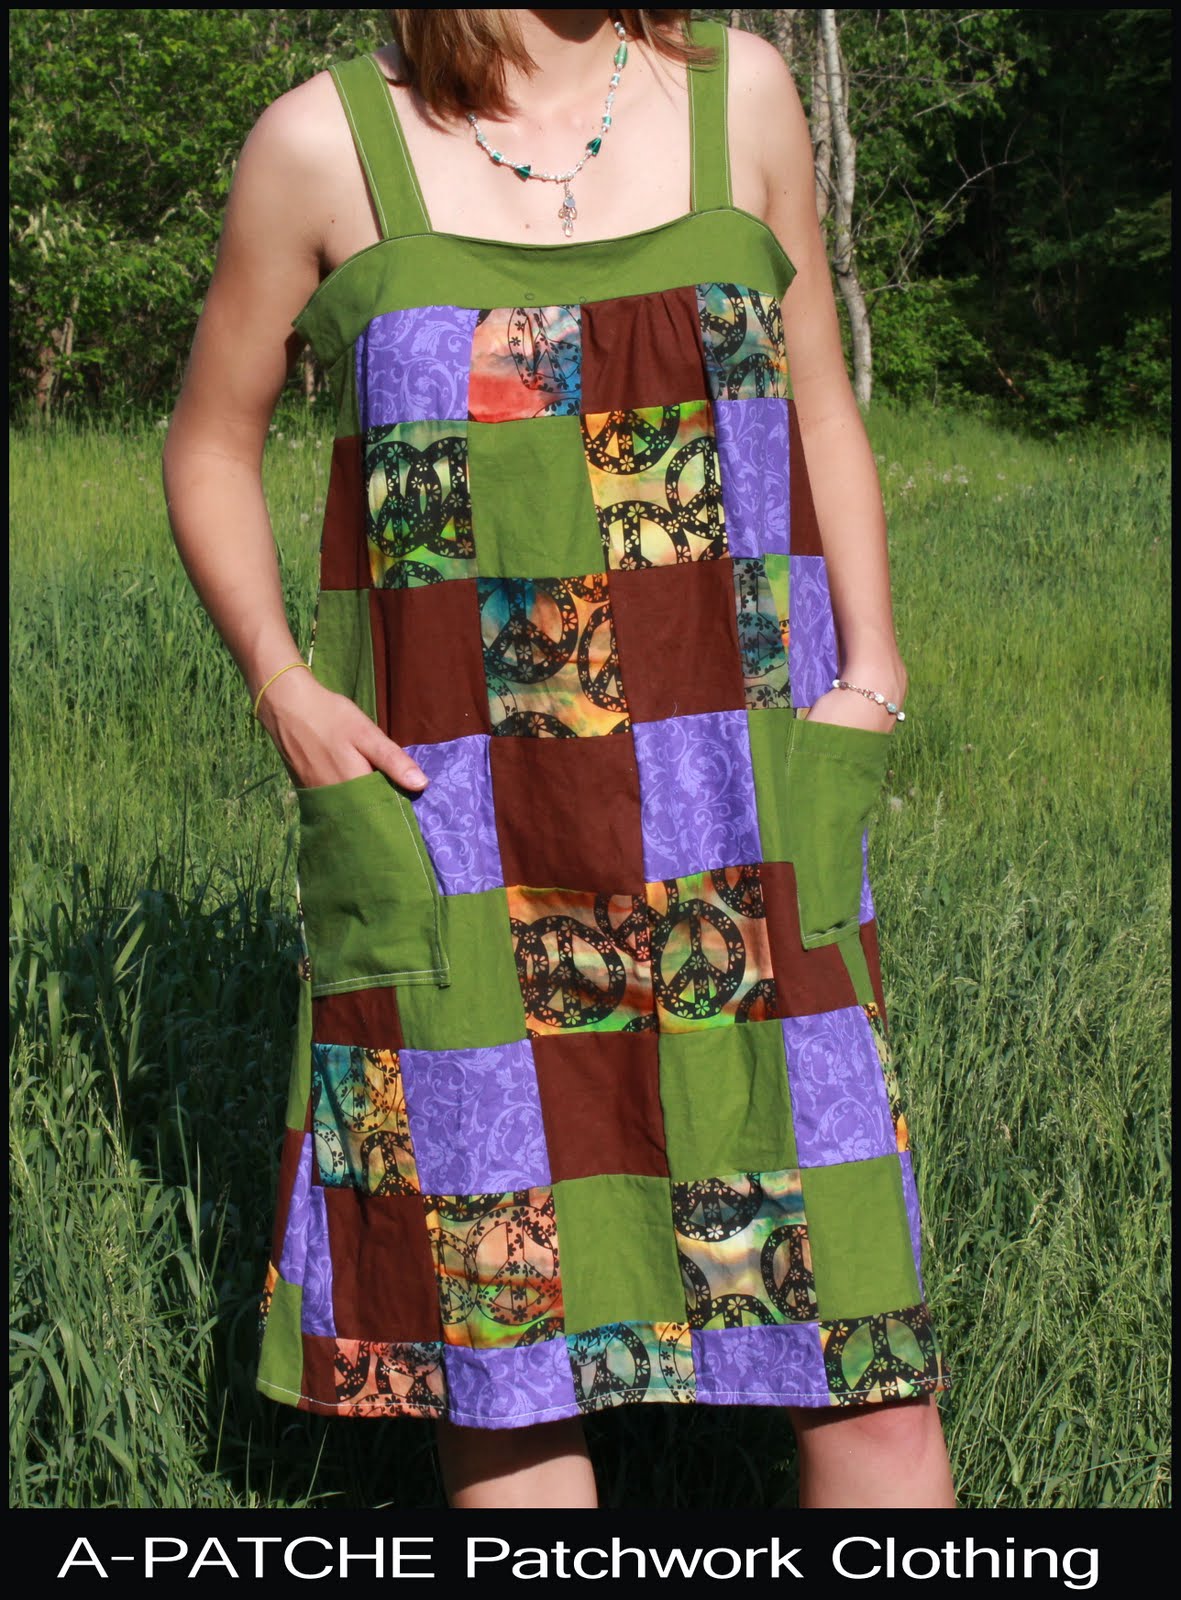 A PATCHE Patchwork Clothing 